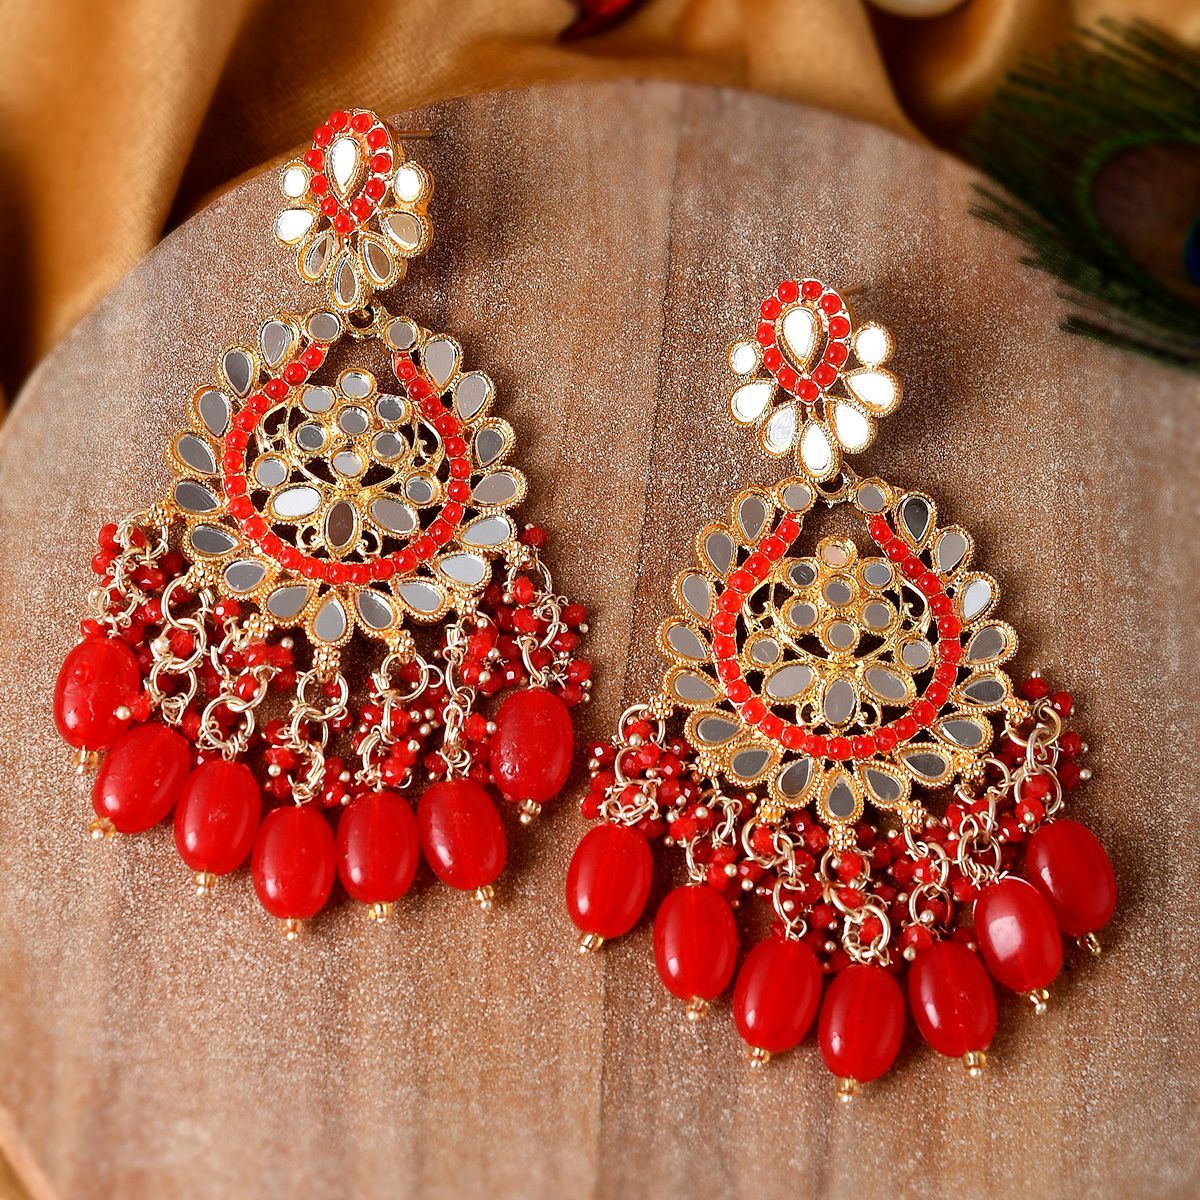 Gold Necklace And Earrings Jewelry With Red Bridal Wedding Dress In  Background Luxury Necklace Indian Traditional Jewellery Necklace Royal  Indian Wedding Concept Stock Photo  Download Image Now  iStock